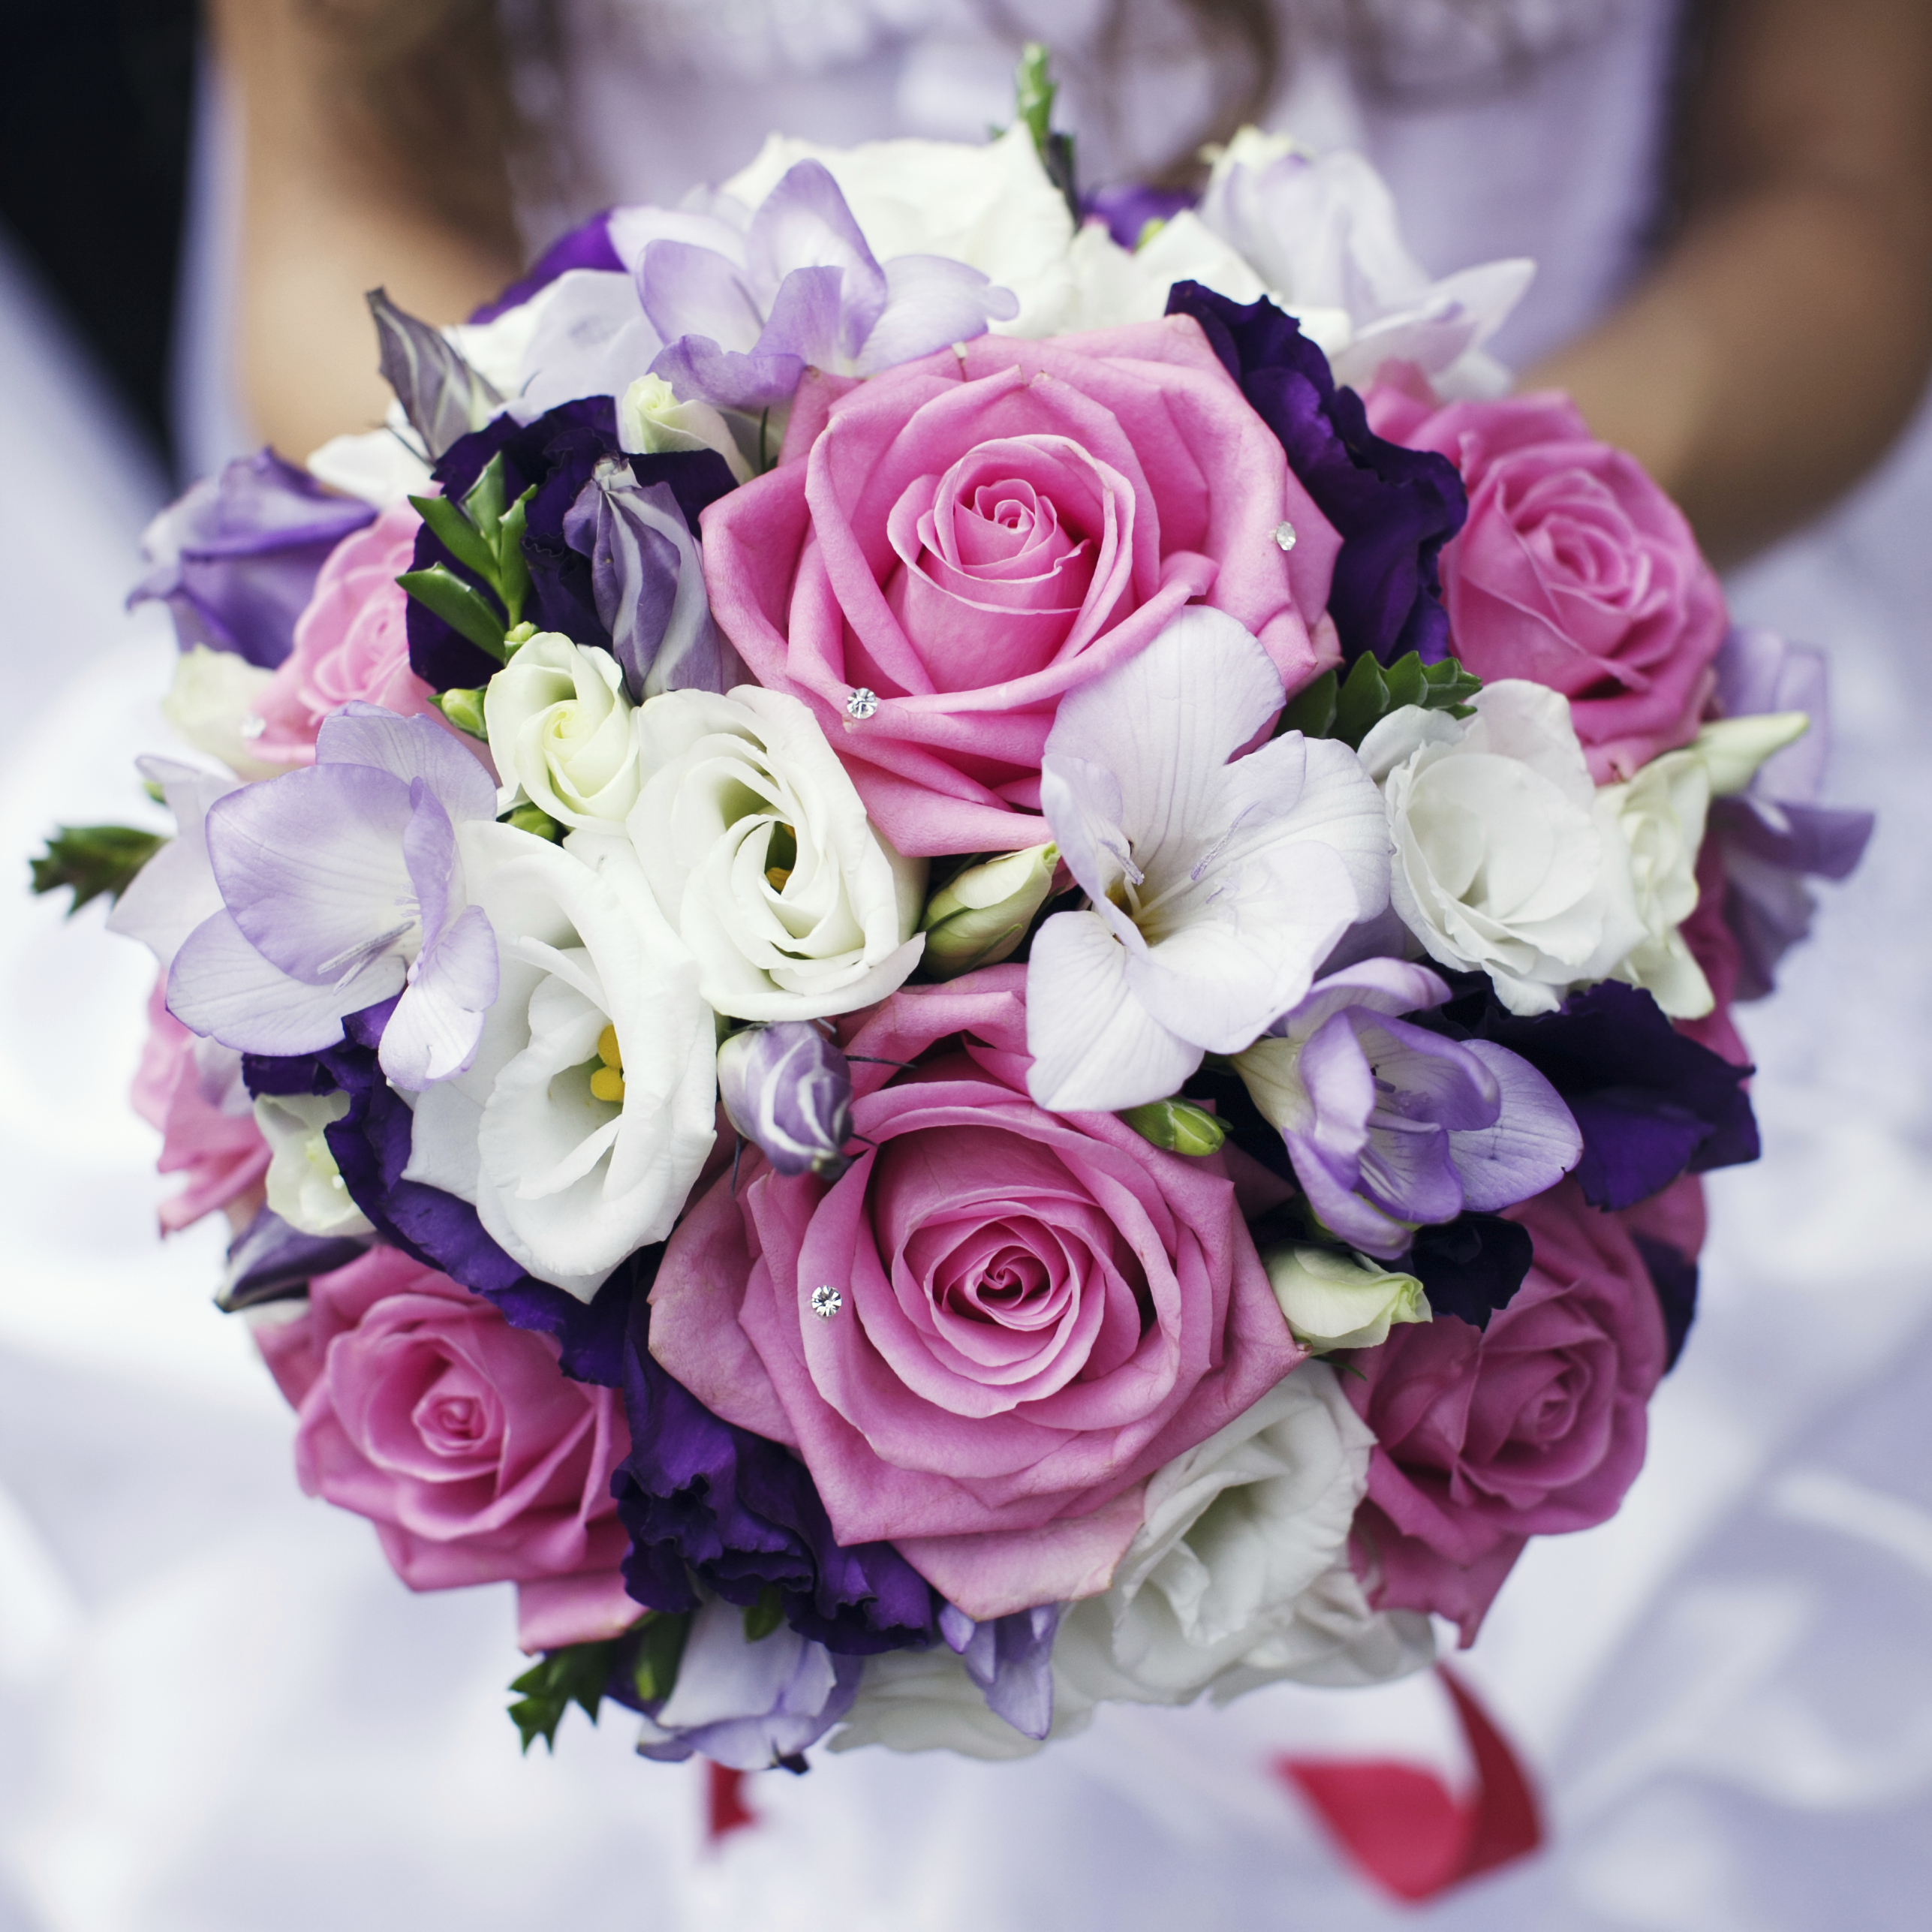 How To Choose Your Wedding Flowers